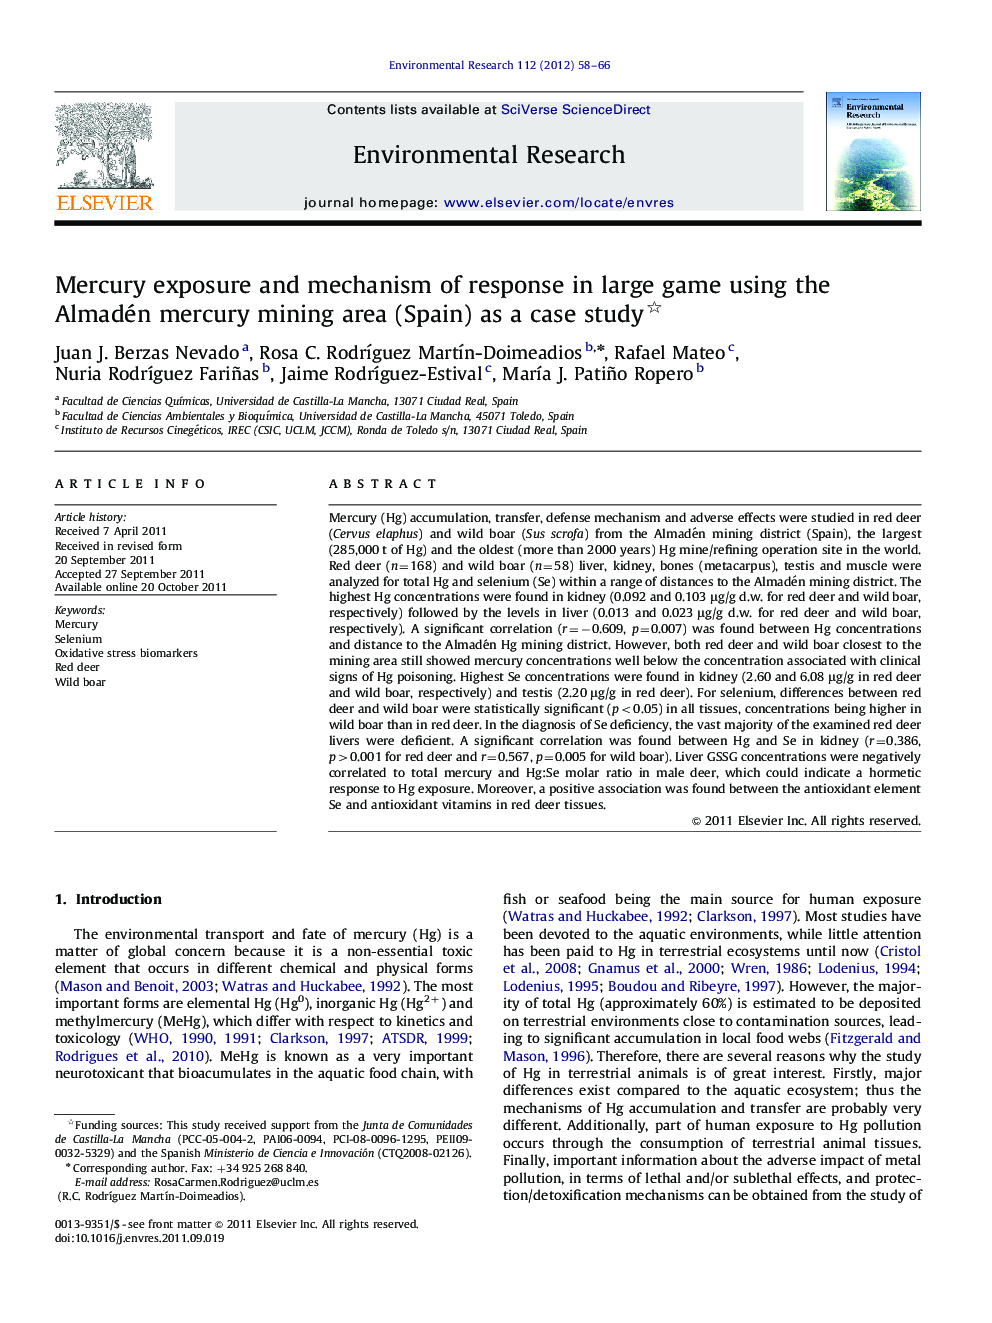 Mercury exposure and mechanism of response in large game using the Almadén mercury mining area (Spain) as a case study 